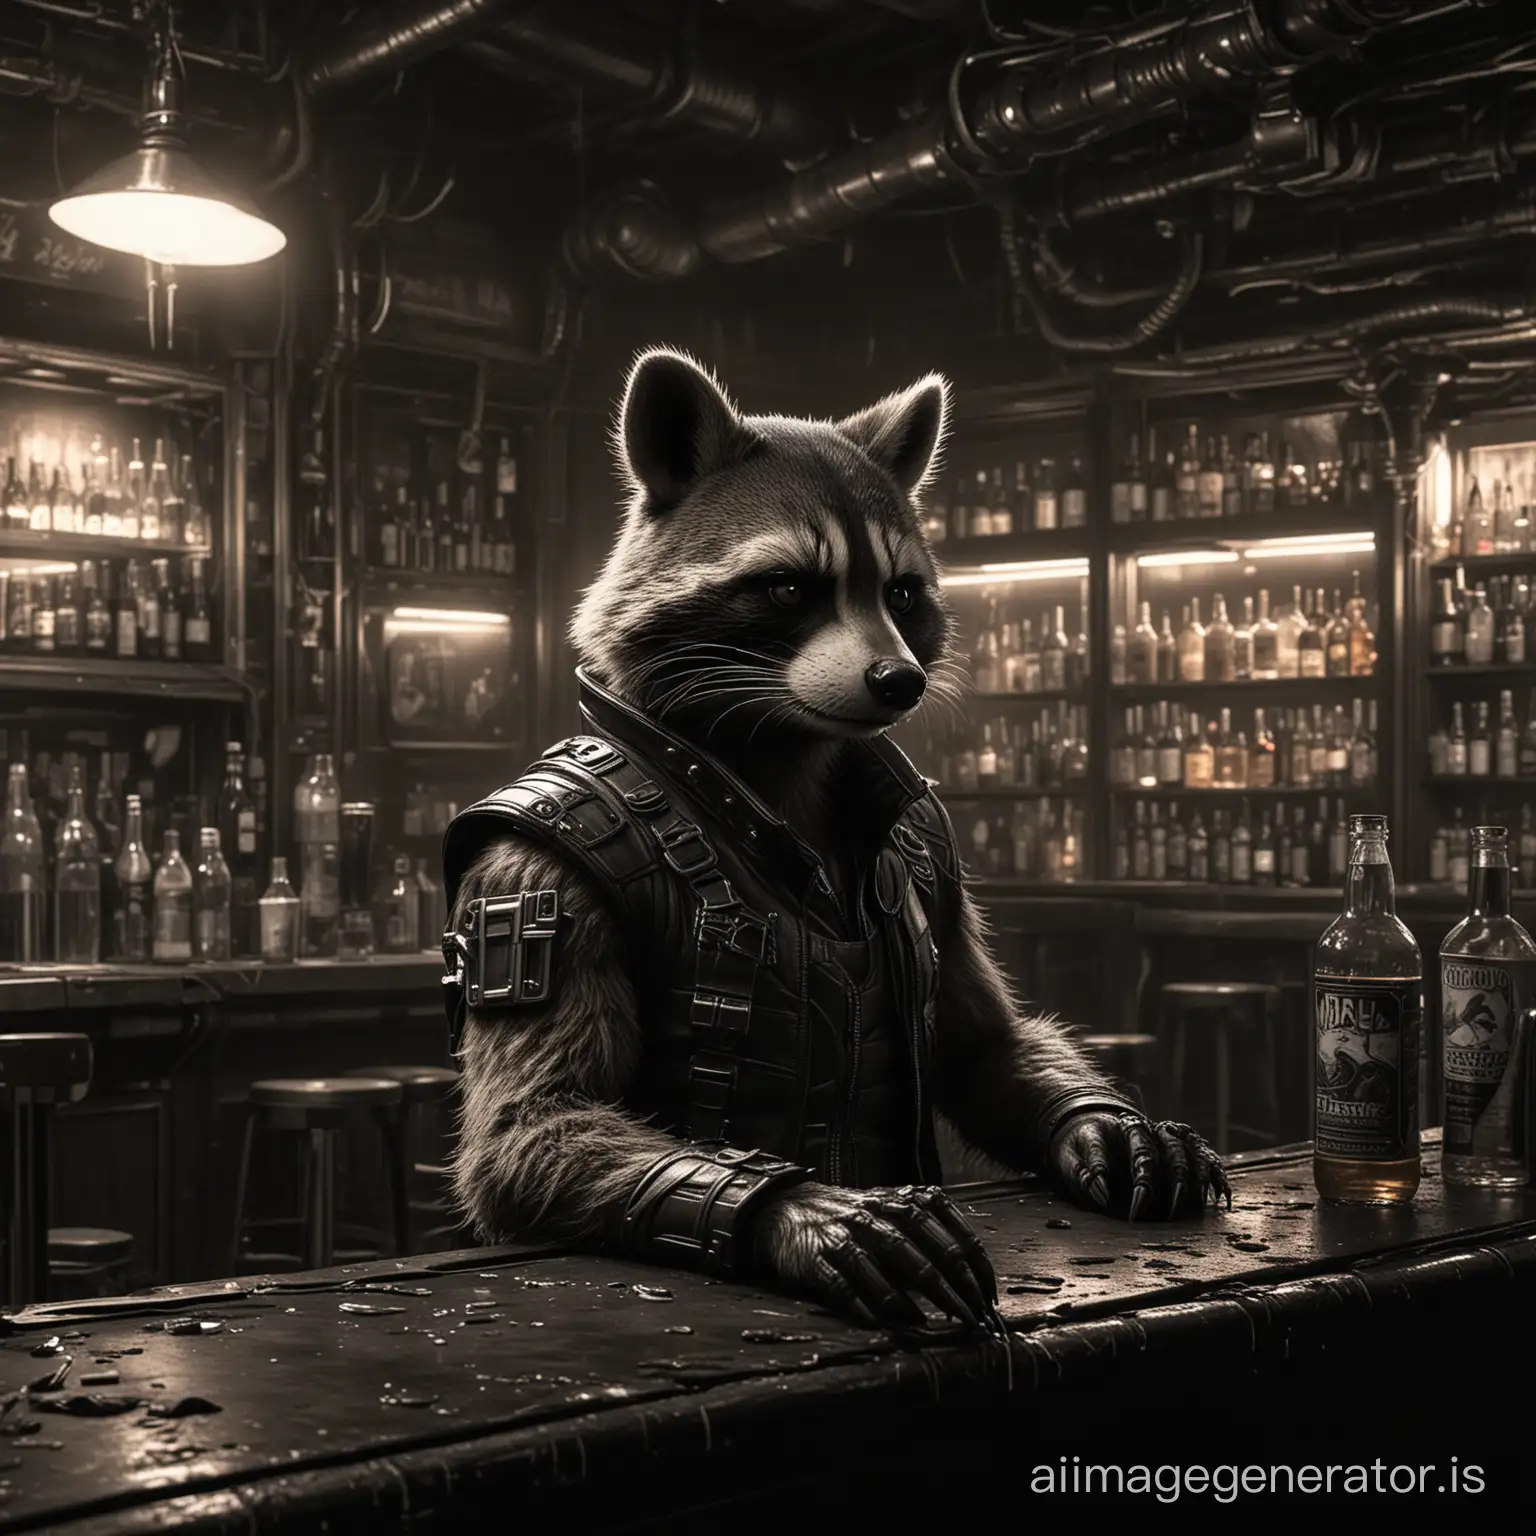 "Rocket Raccoon" noir at the bar in the cyberpunk style,(neon lighting,Giger-style abandoned world location);(epic, epic detail, masterpiece, best quality, photorealistic, ultra-high detail)